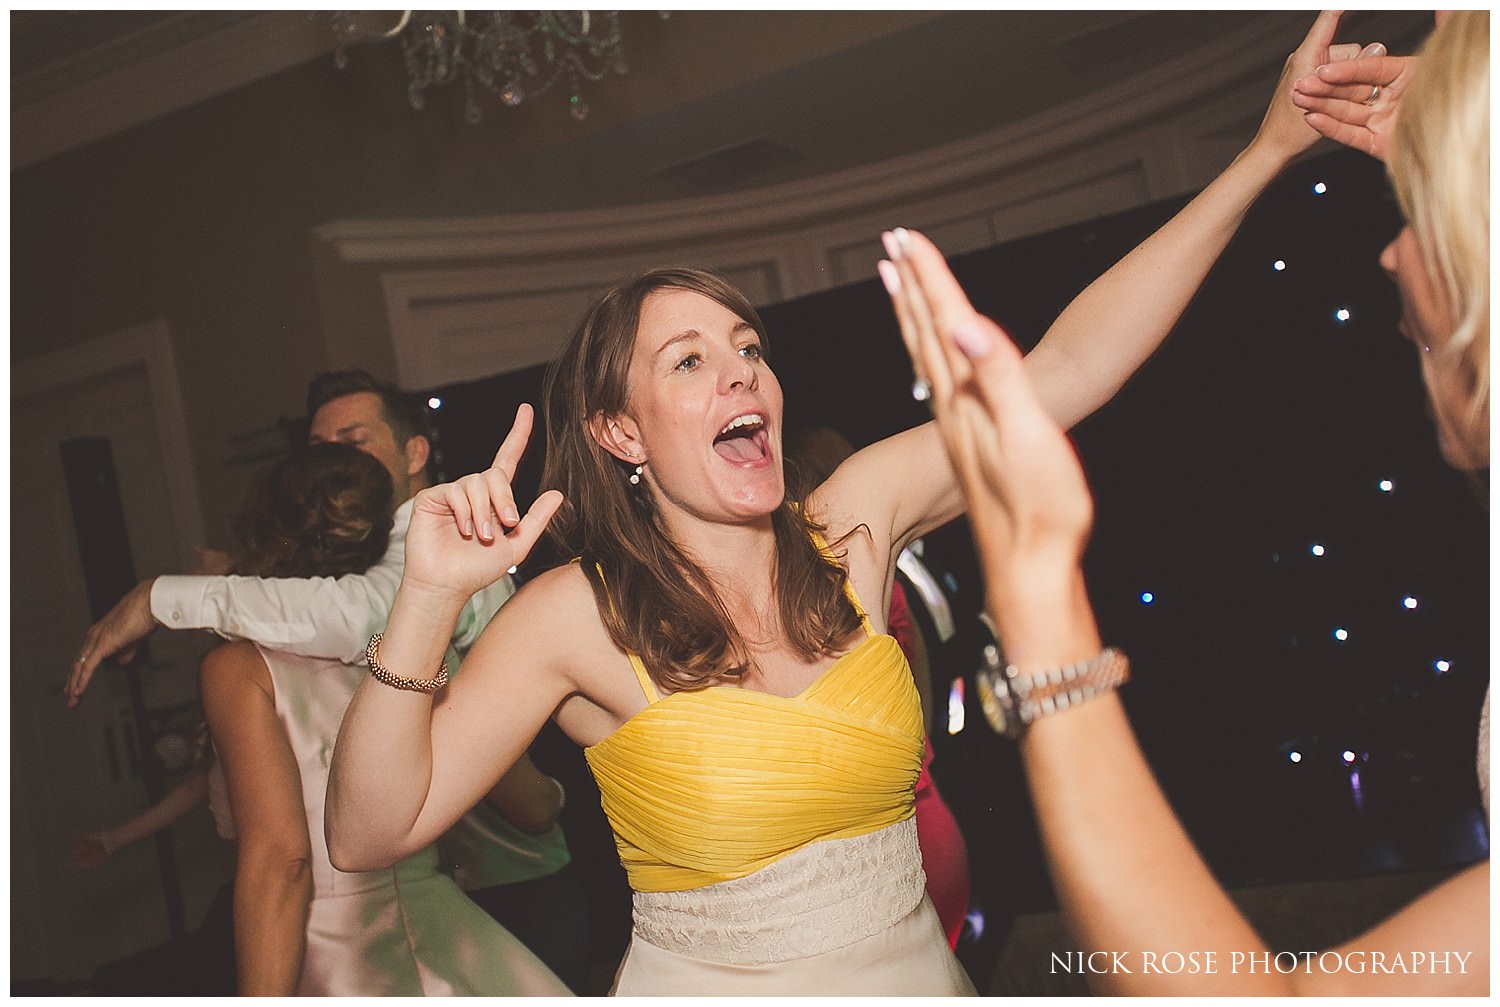  Lady dancing during a wedding reception at the Rudding Park Hotel in Harrogate North Yorkshire 